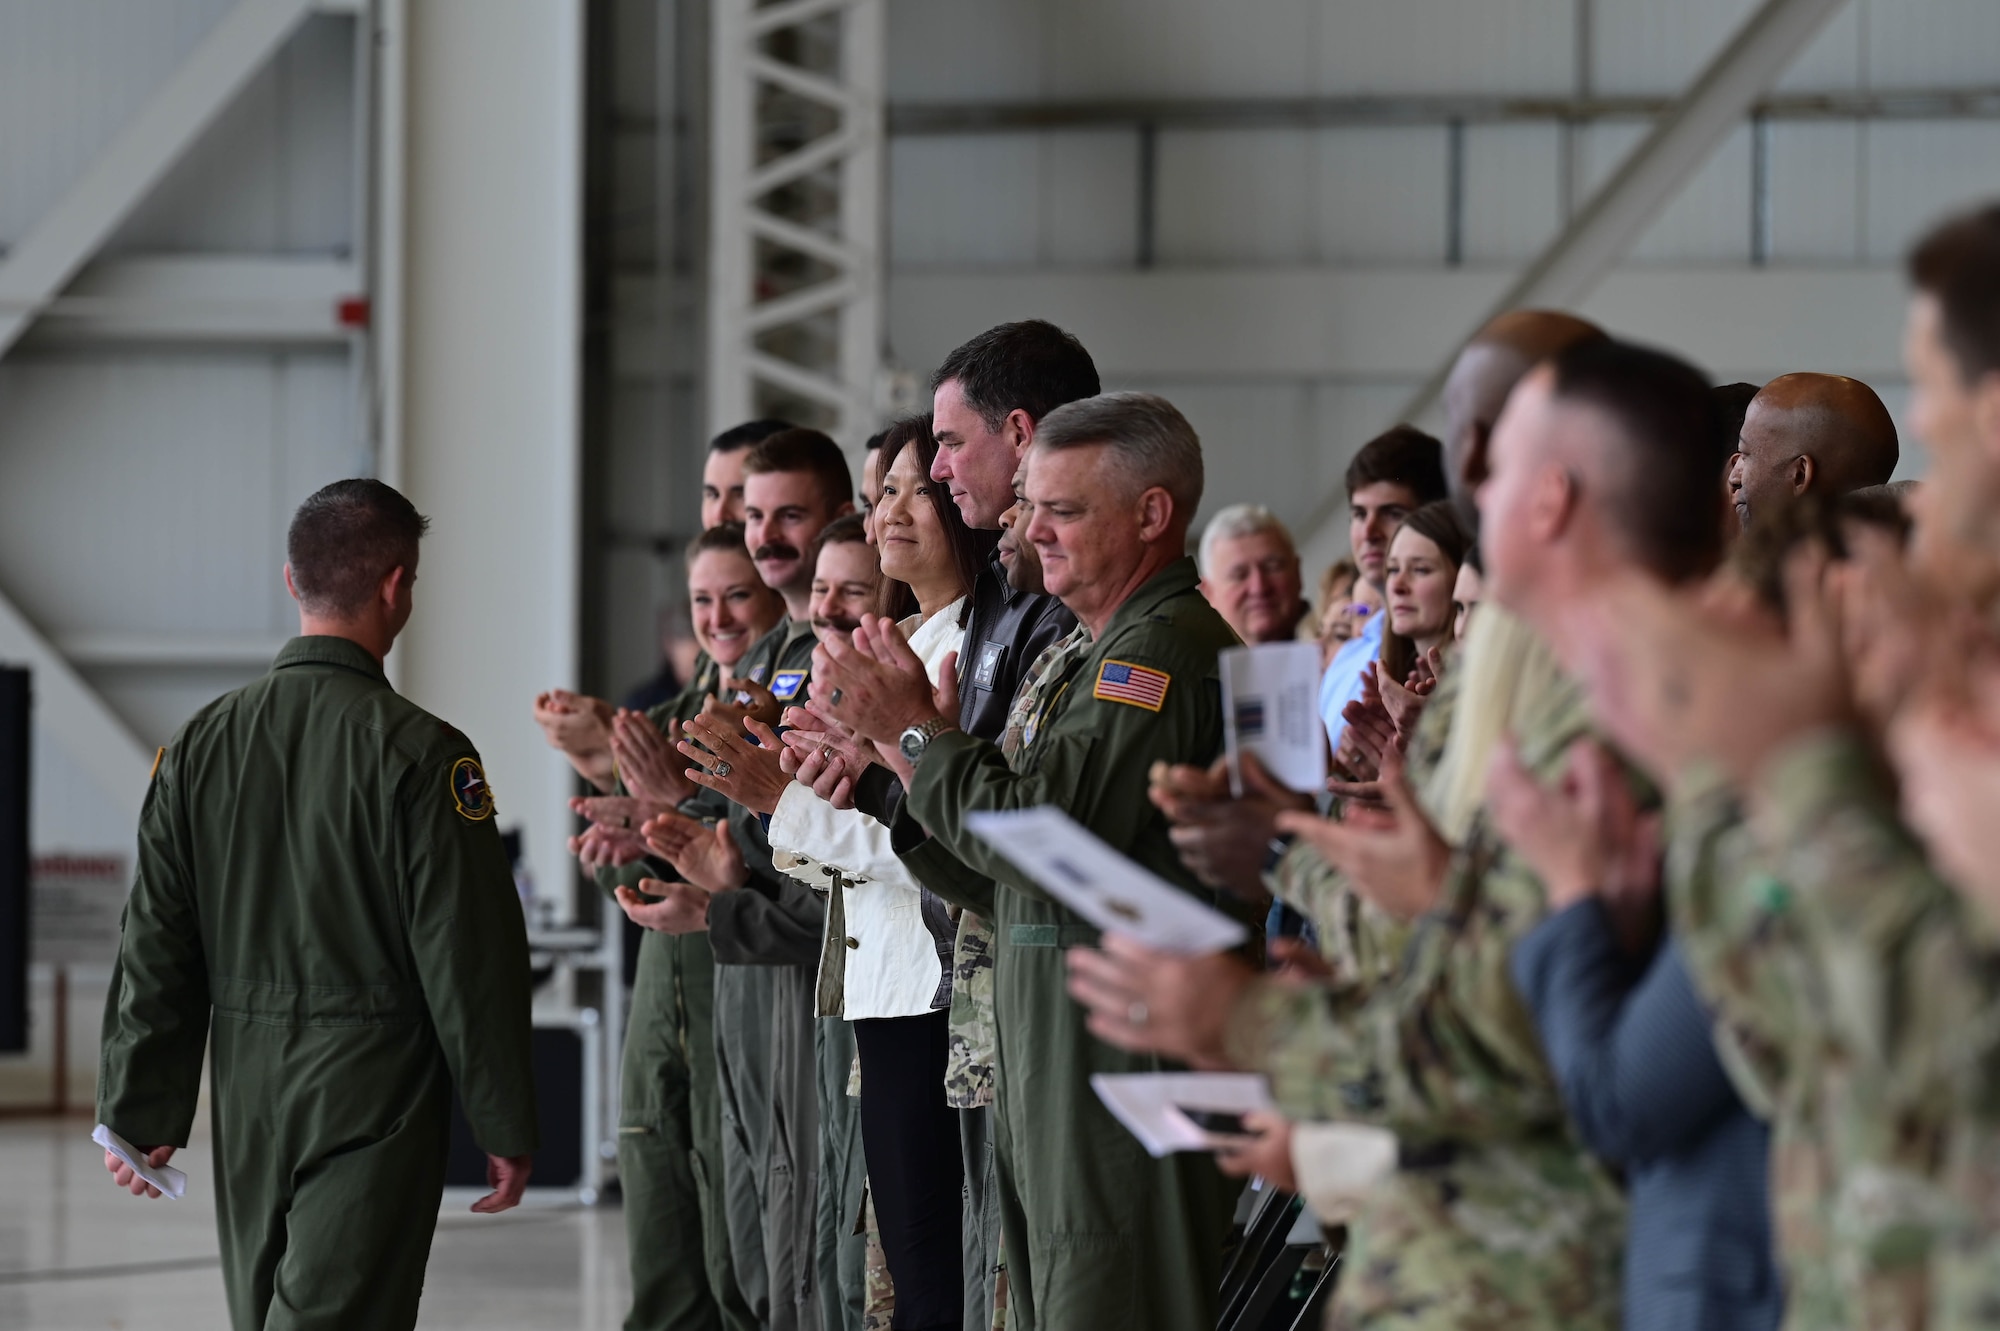 An mixed audience of Airmen, Soldiers, and civilians clap during a ceremony in a hangar.